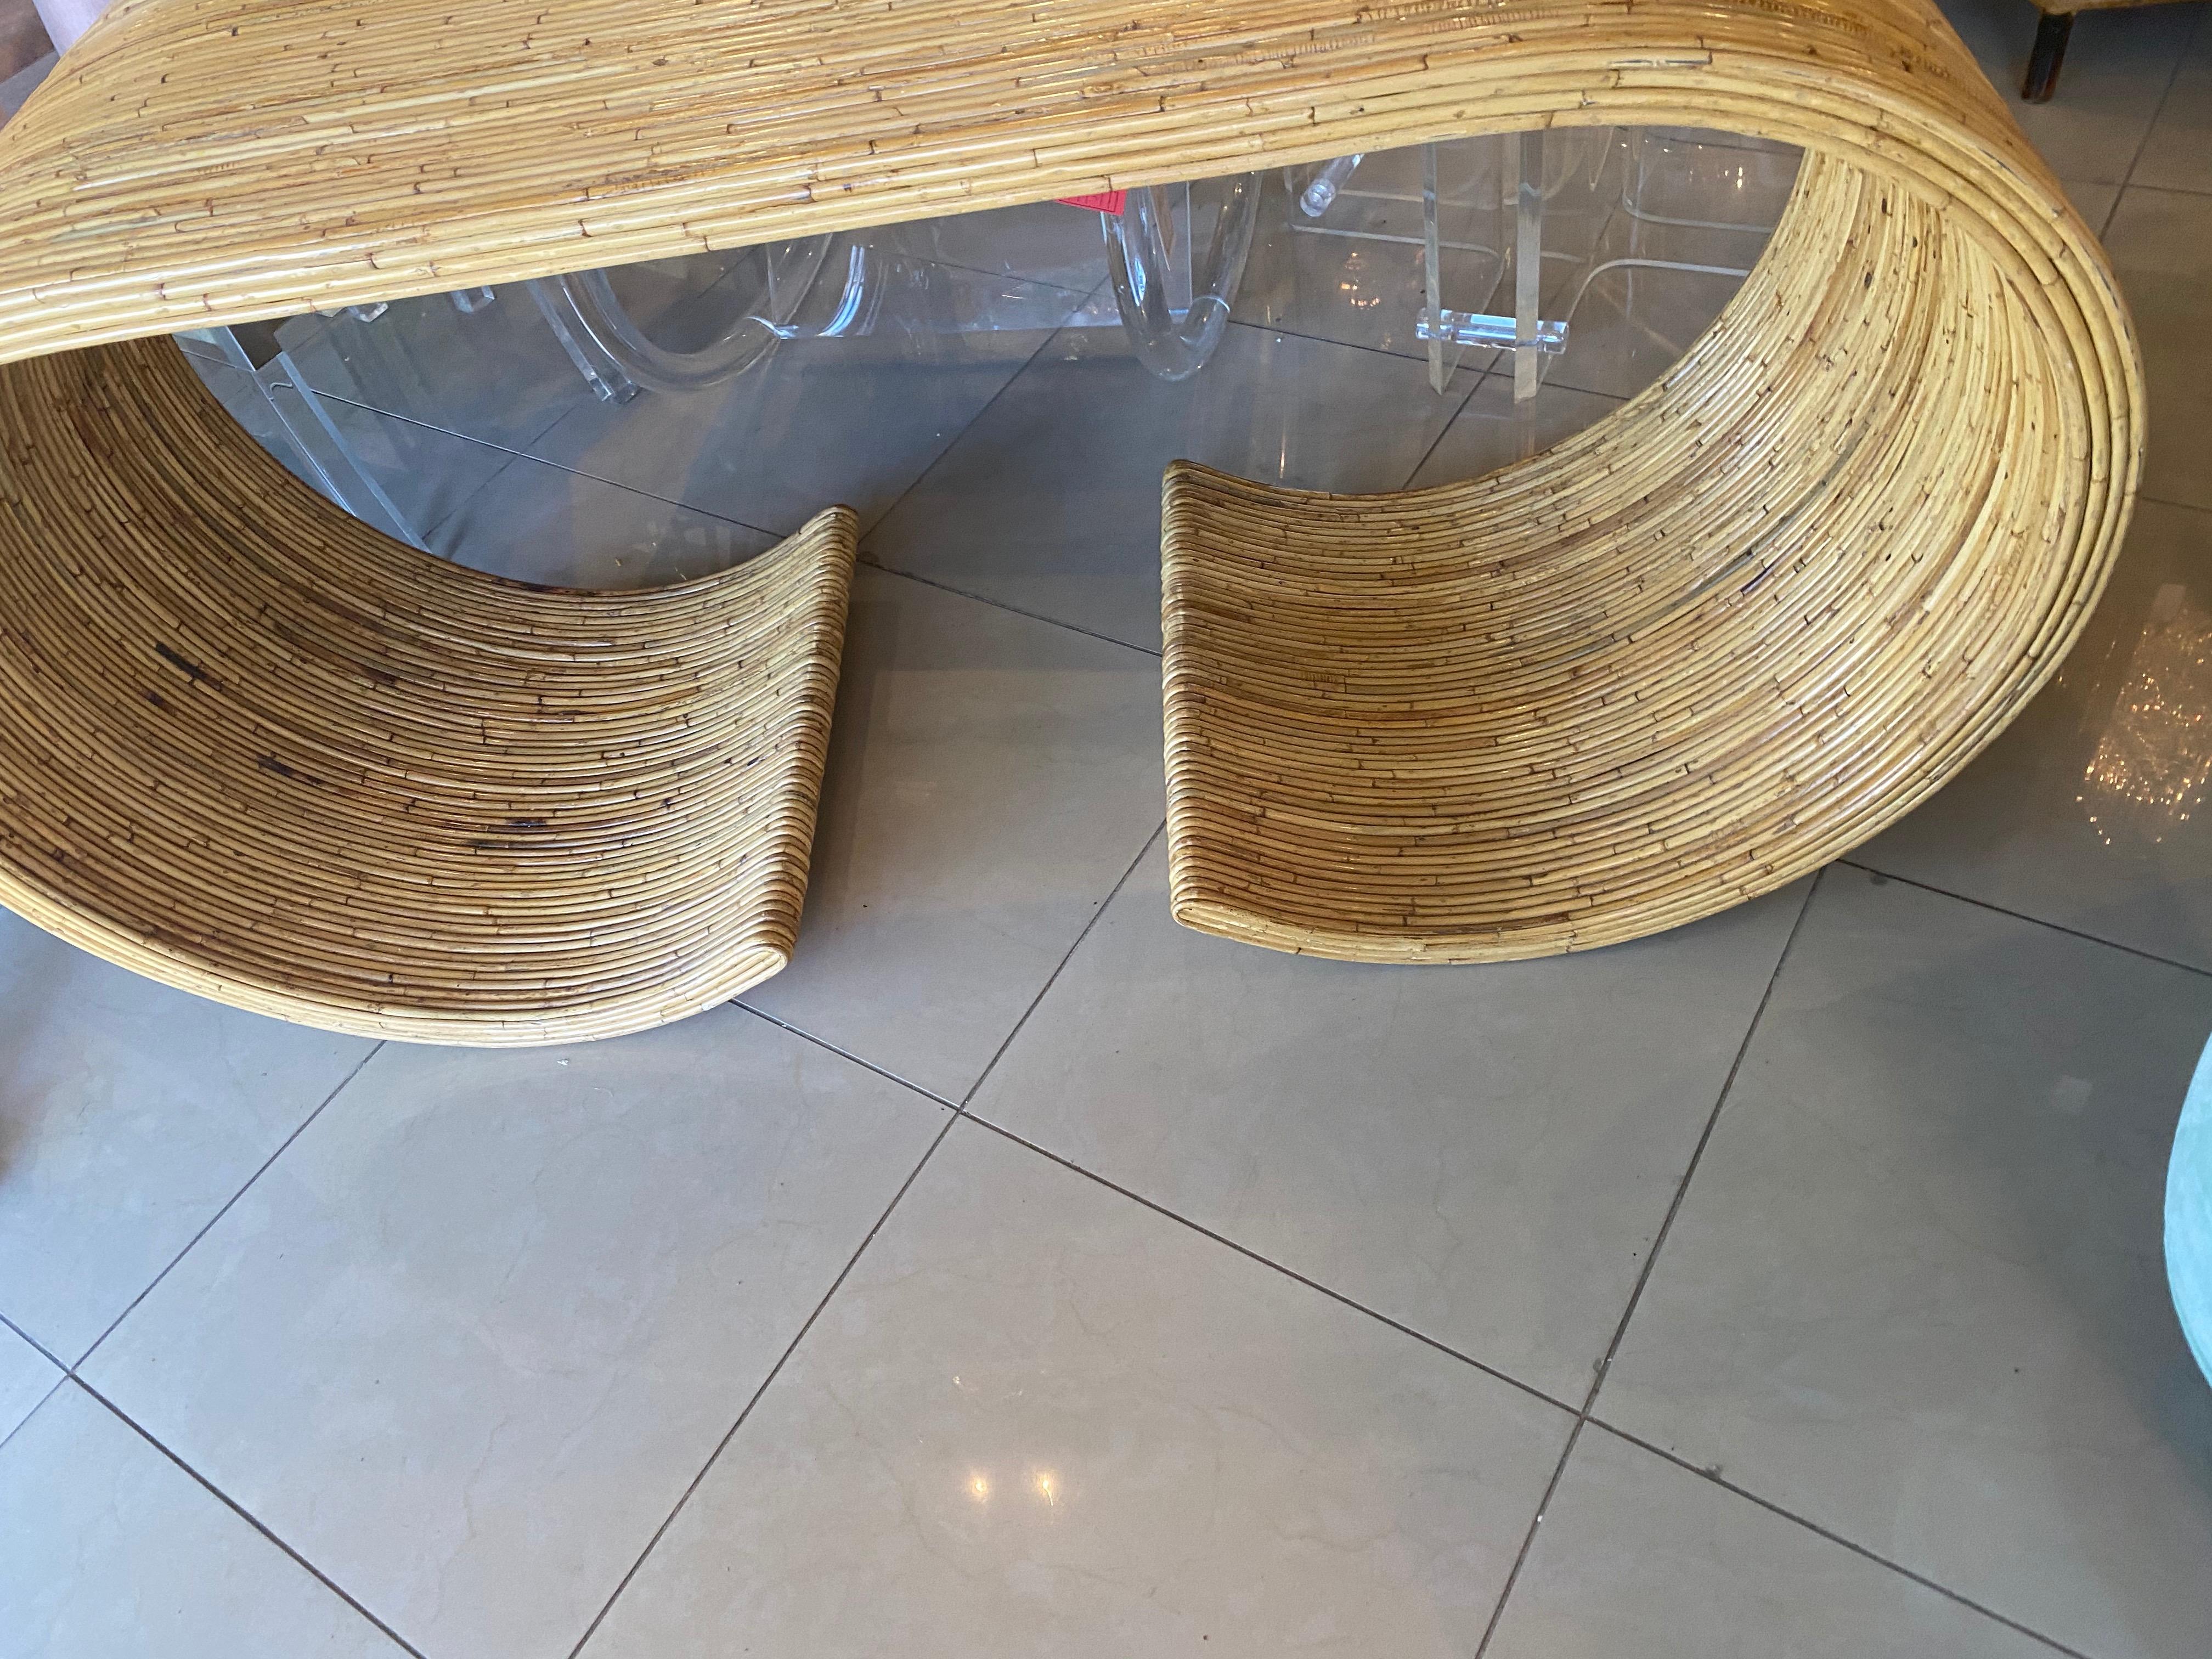 Such an amazing vintage pencil reed bamboo, ming, scroll console table or desk. Love the shape of this beauty. This can be used as a console table or desk because of the width. You can also have glass added to top if you like. No breaks or damage to